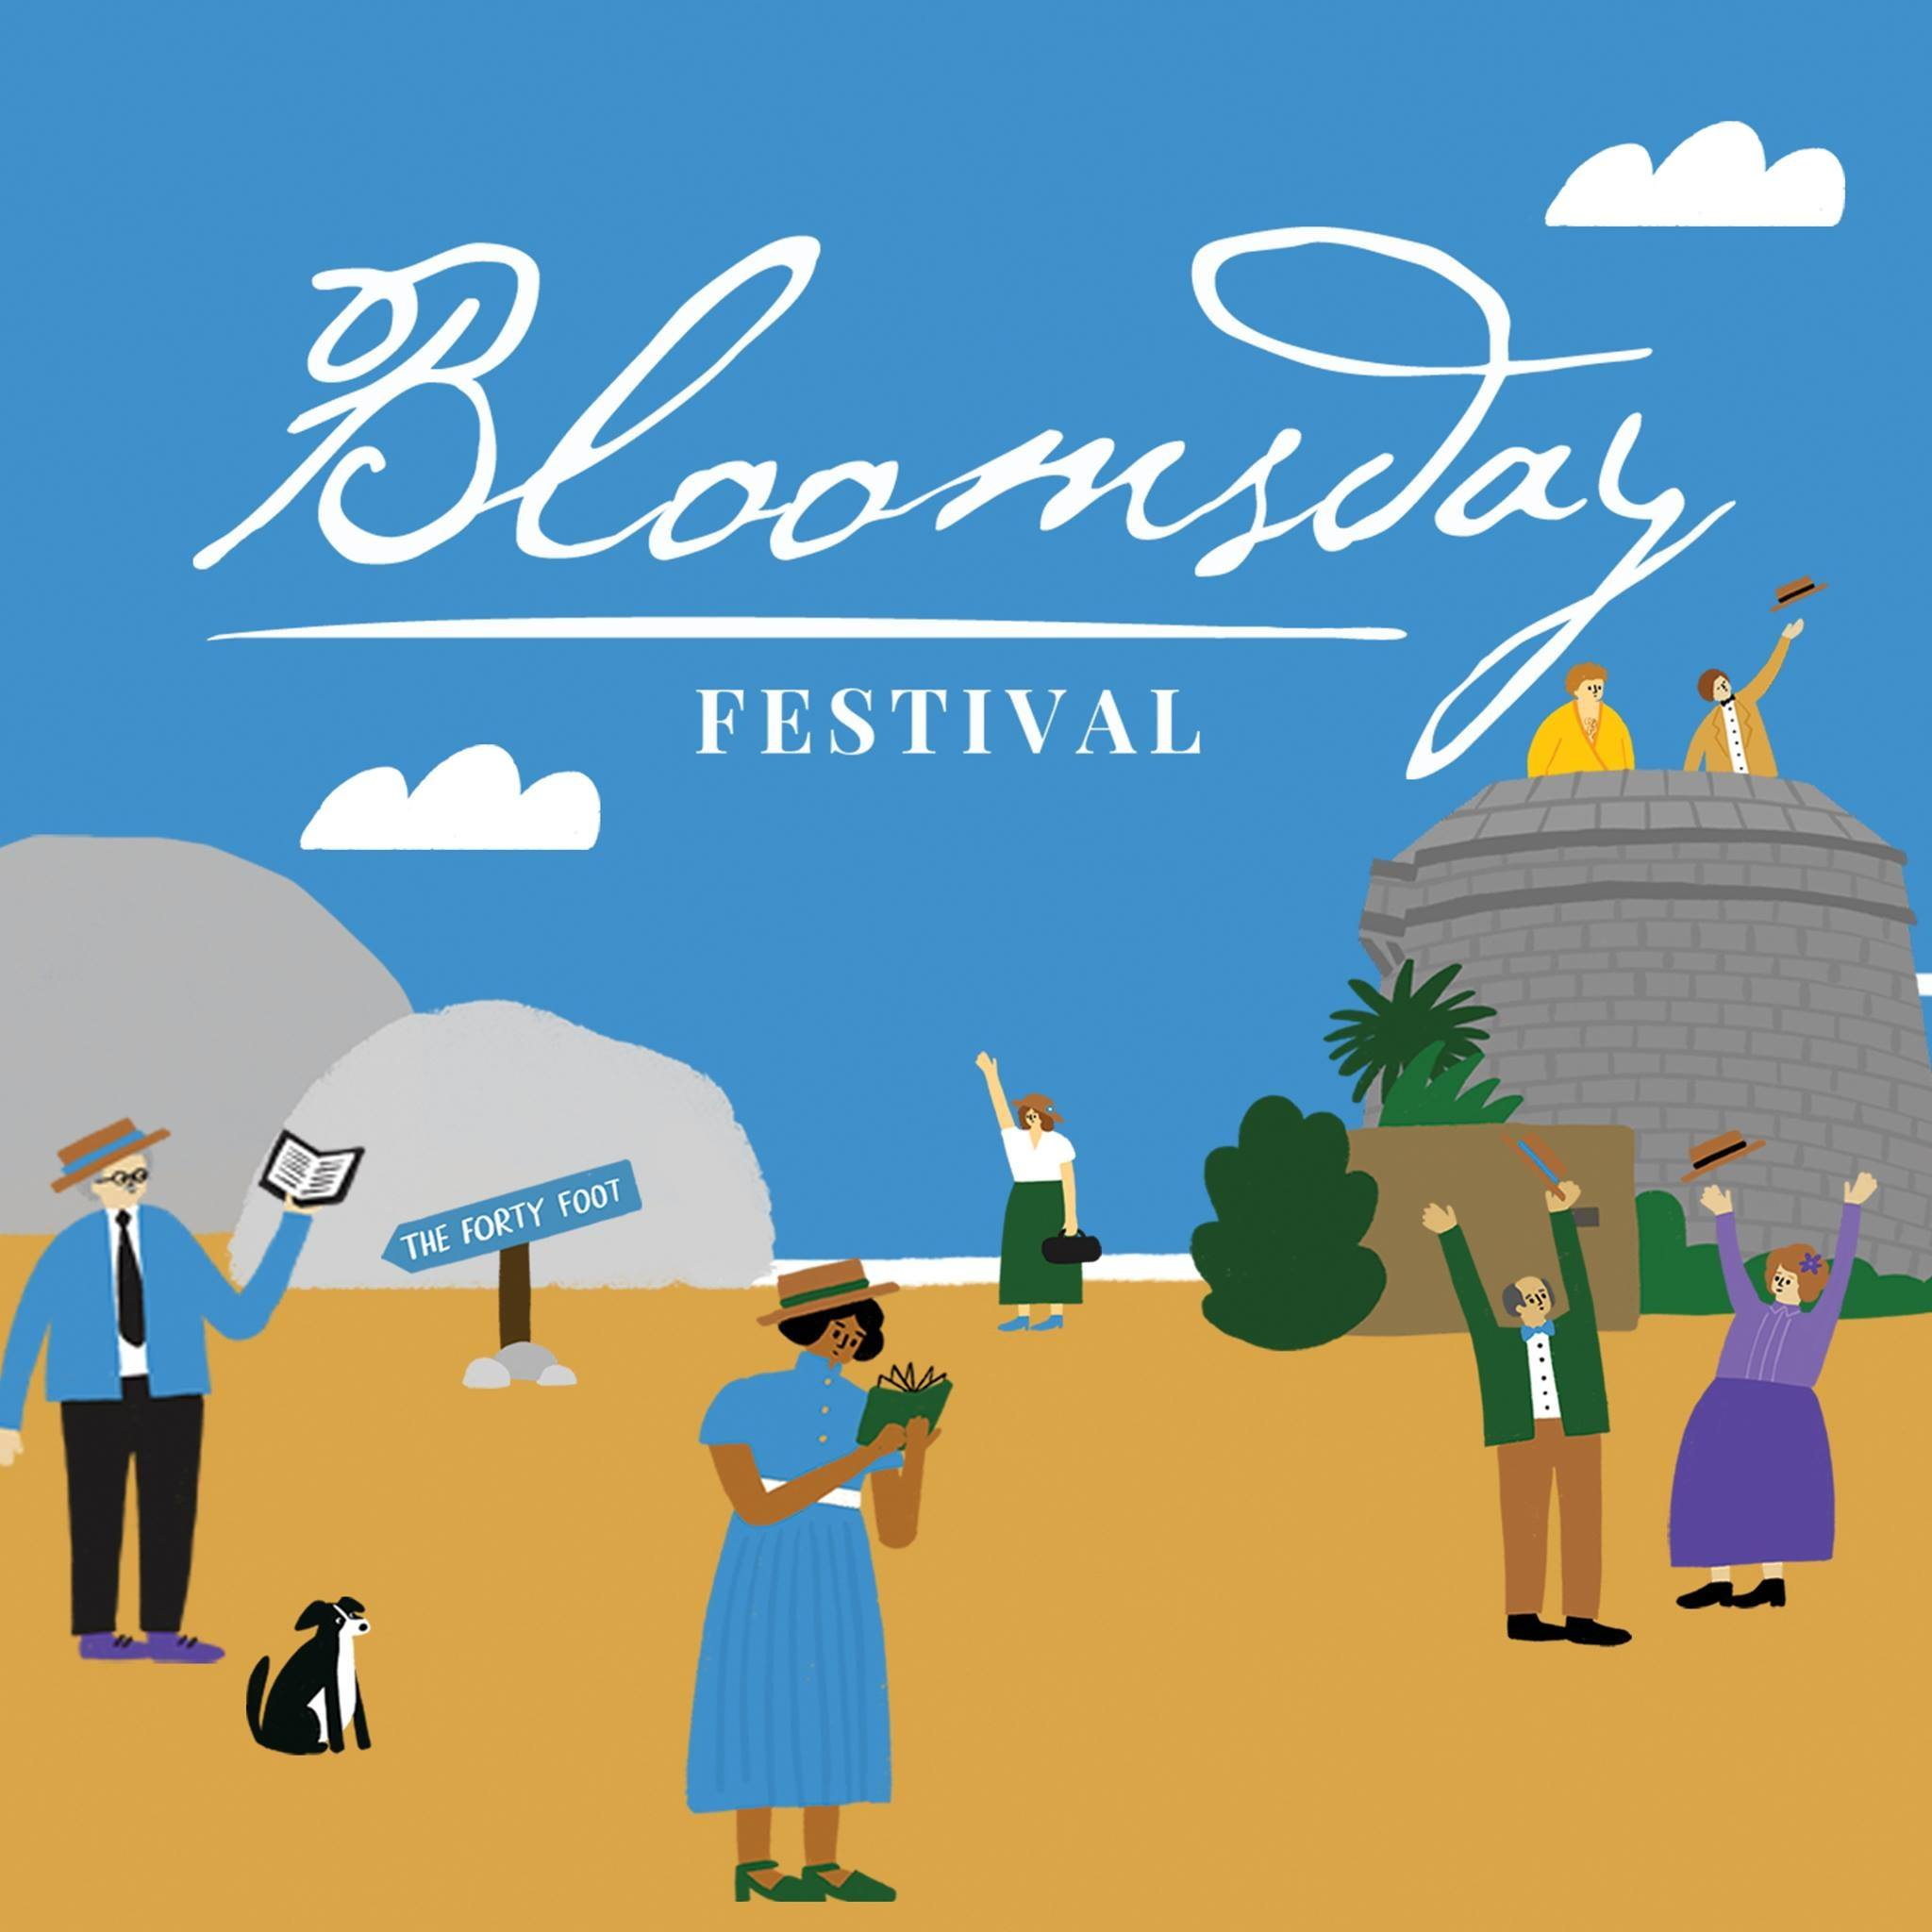 Bloomsday Festival 2022